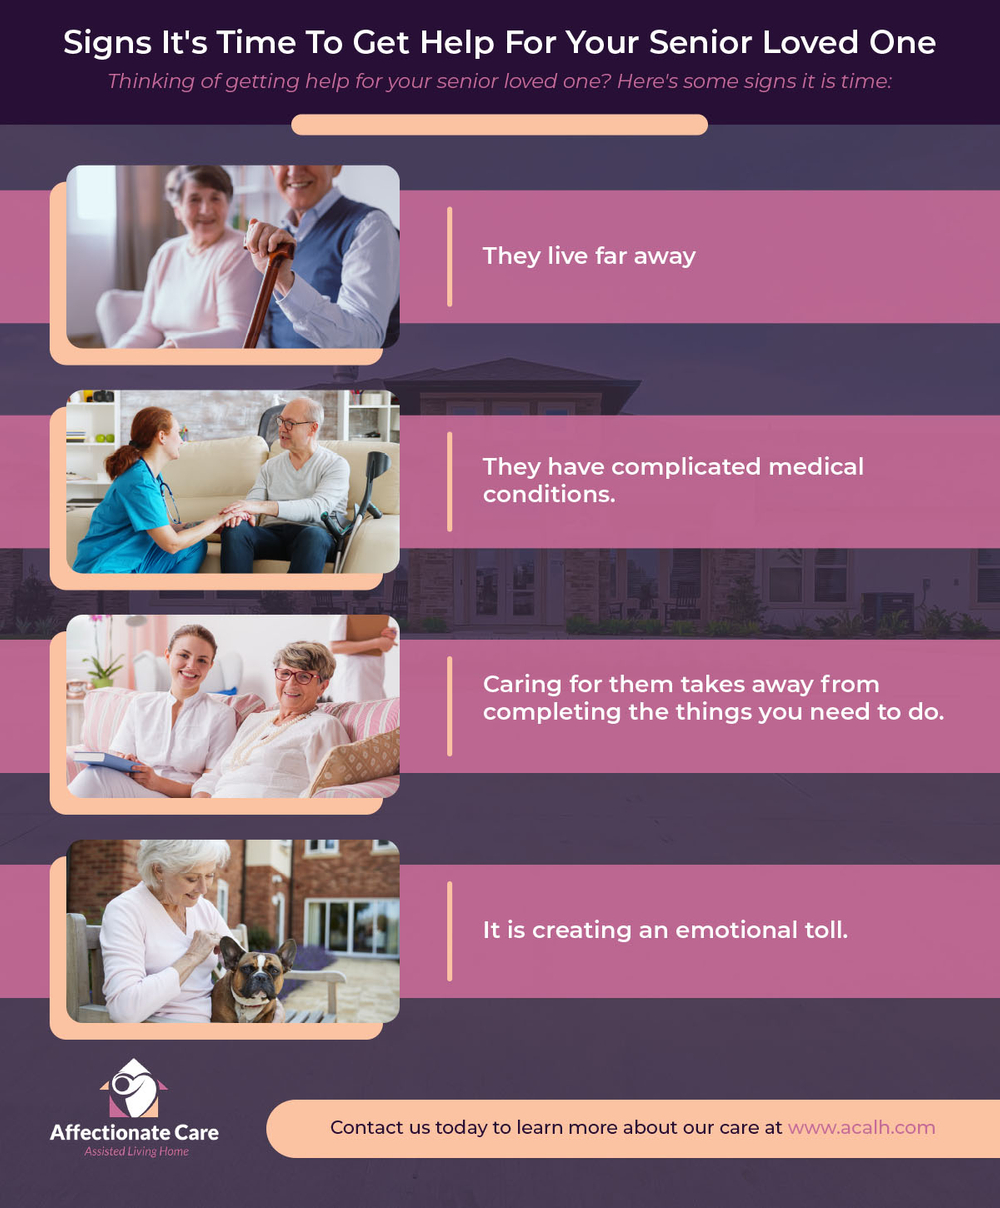 Signs It's Time To Get Help For Your Senior Loved One Infographic.jpg